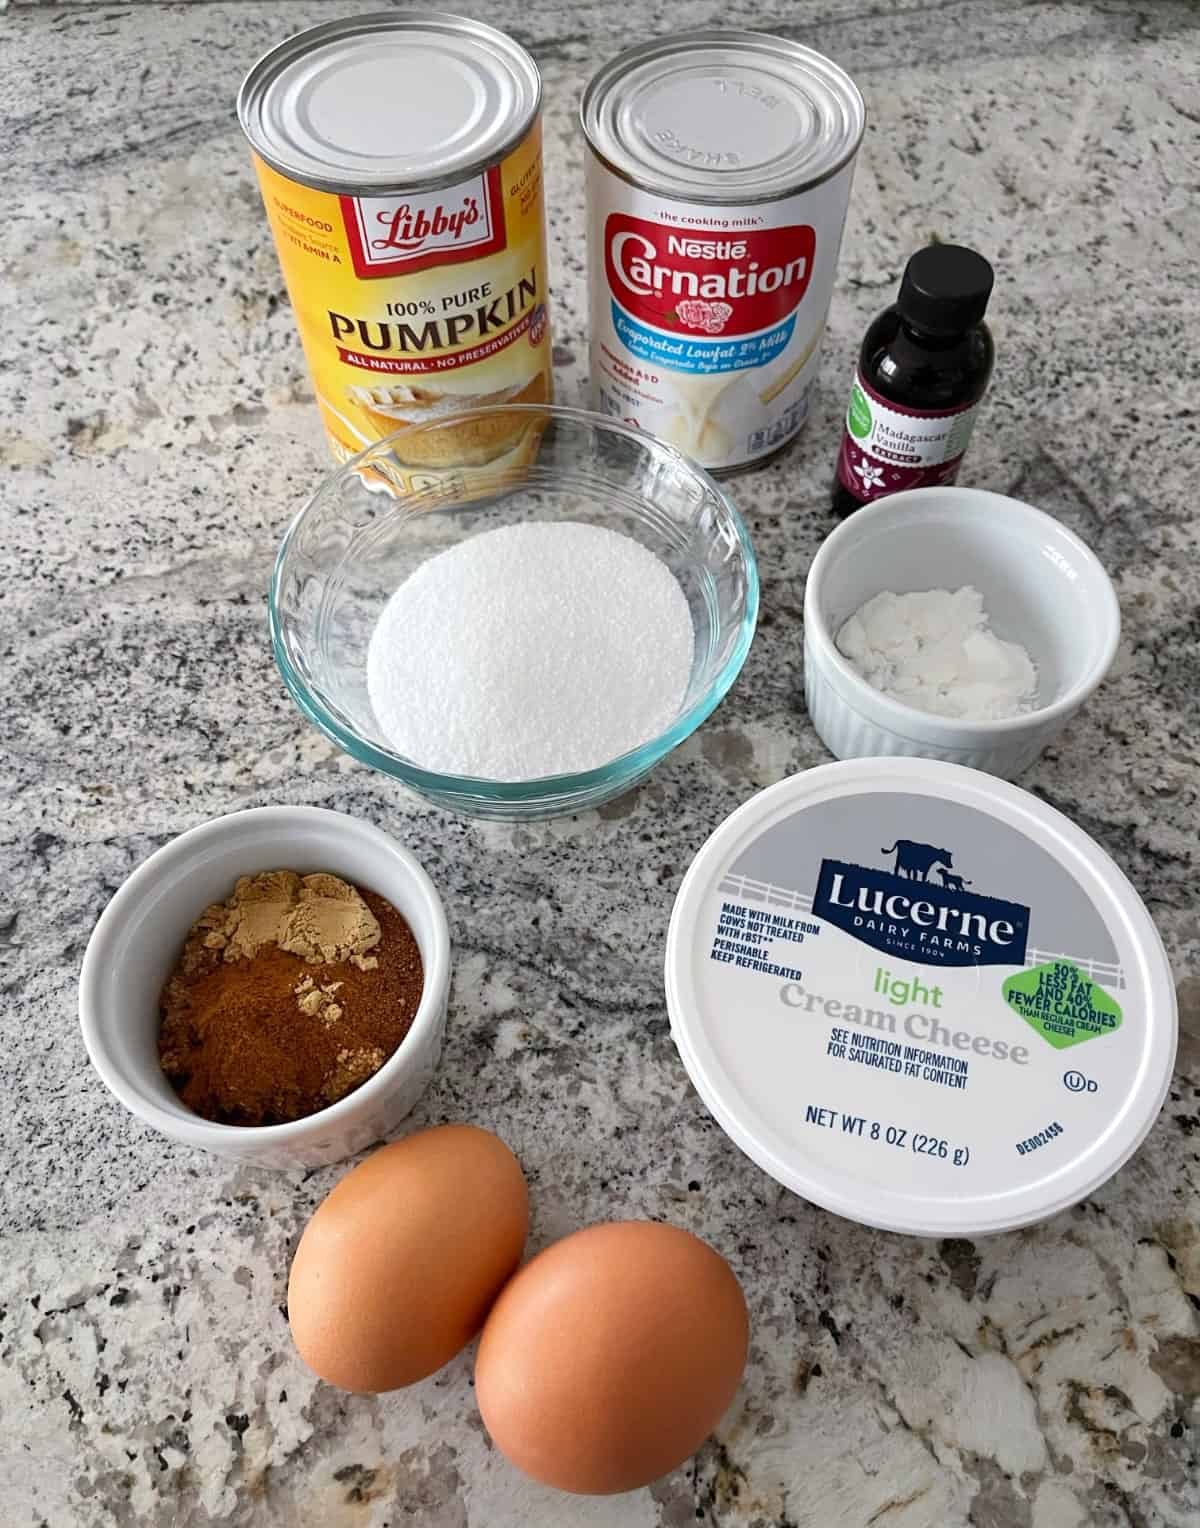 Ingredients including can of pure pumpkin, low-fat evaporated milk, vanilla extract, cornstarch, Truvia Baking Blend, brown sugar with cinnamon, light cream cheese and two eggs on granite.